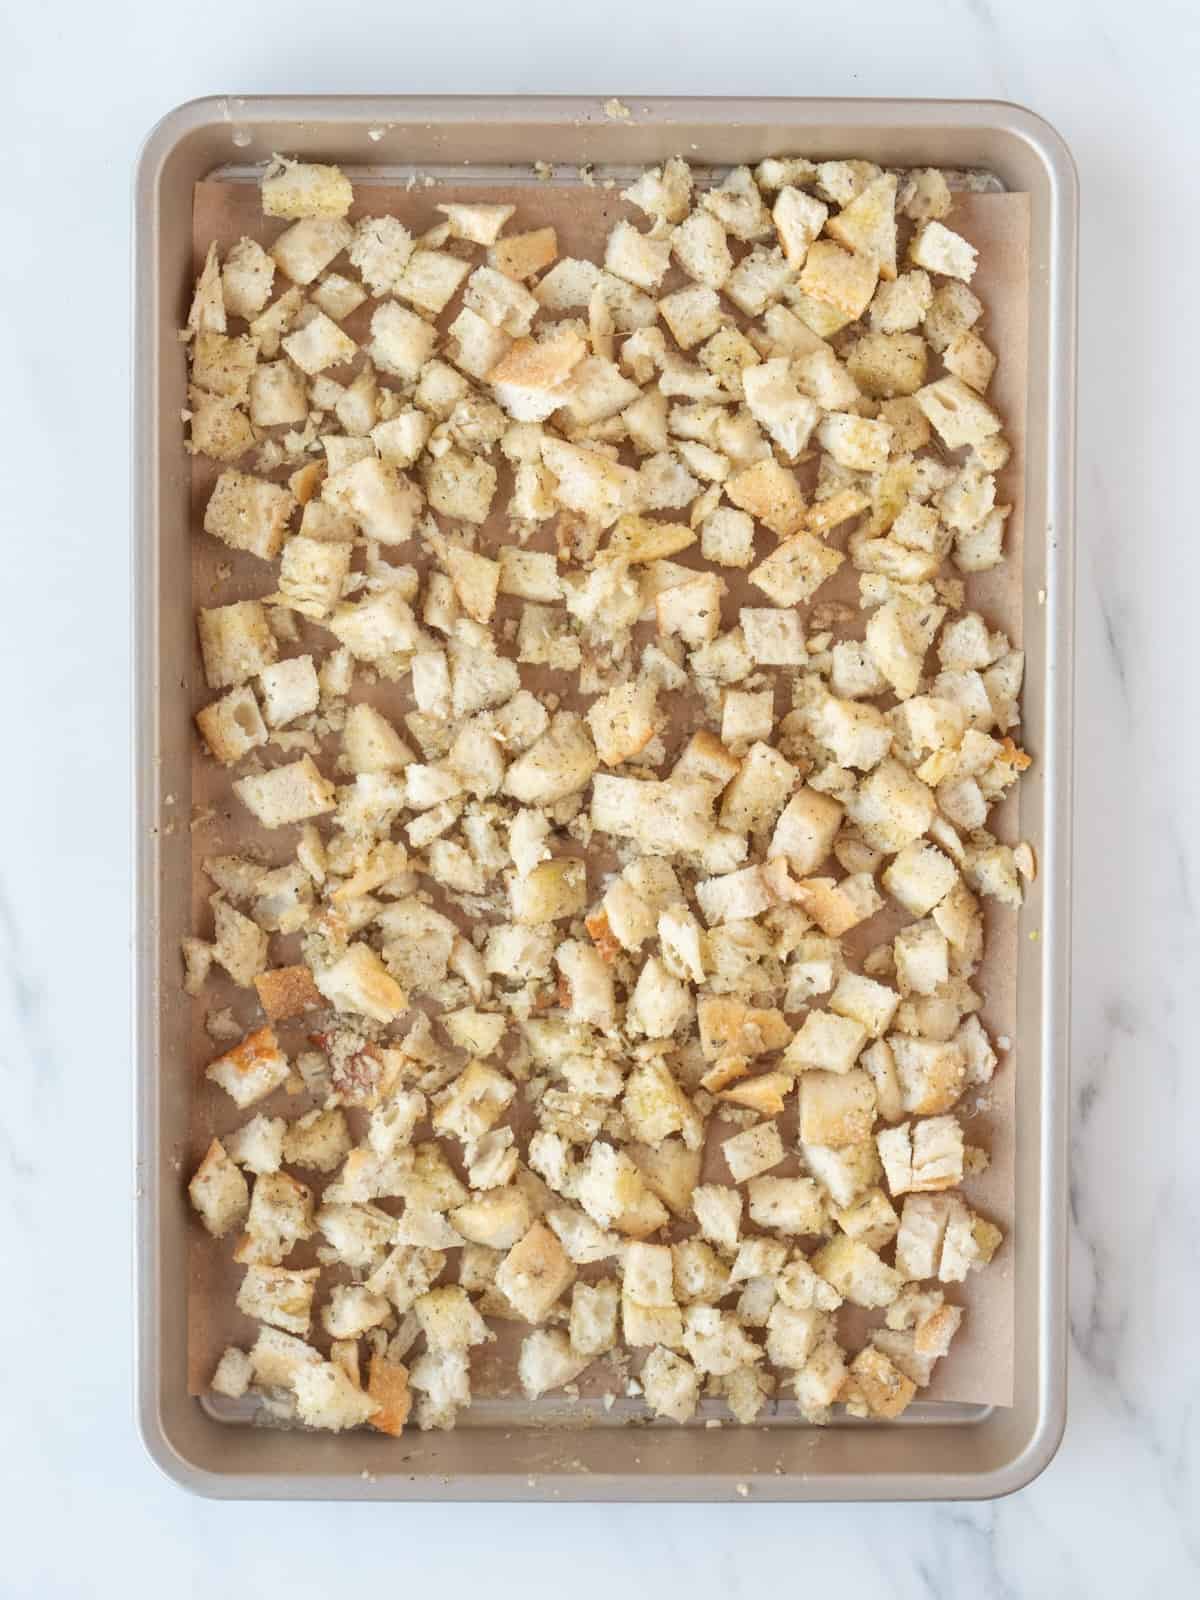 A rectangular parchment paper-lined baking sheet of cubed pieces of bread and tossed with olive oil and sprinkled with garlic, salt, pepper and italian seasoning.